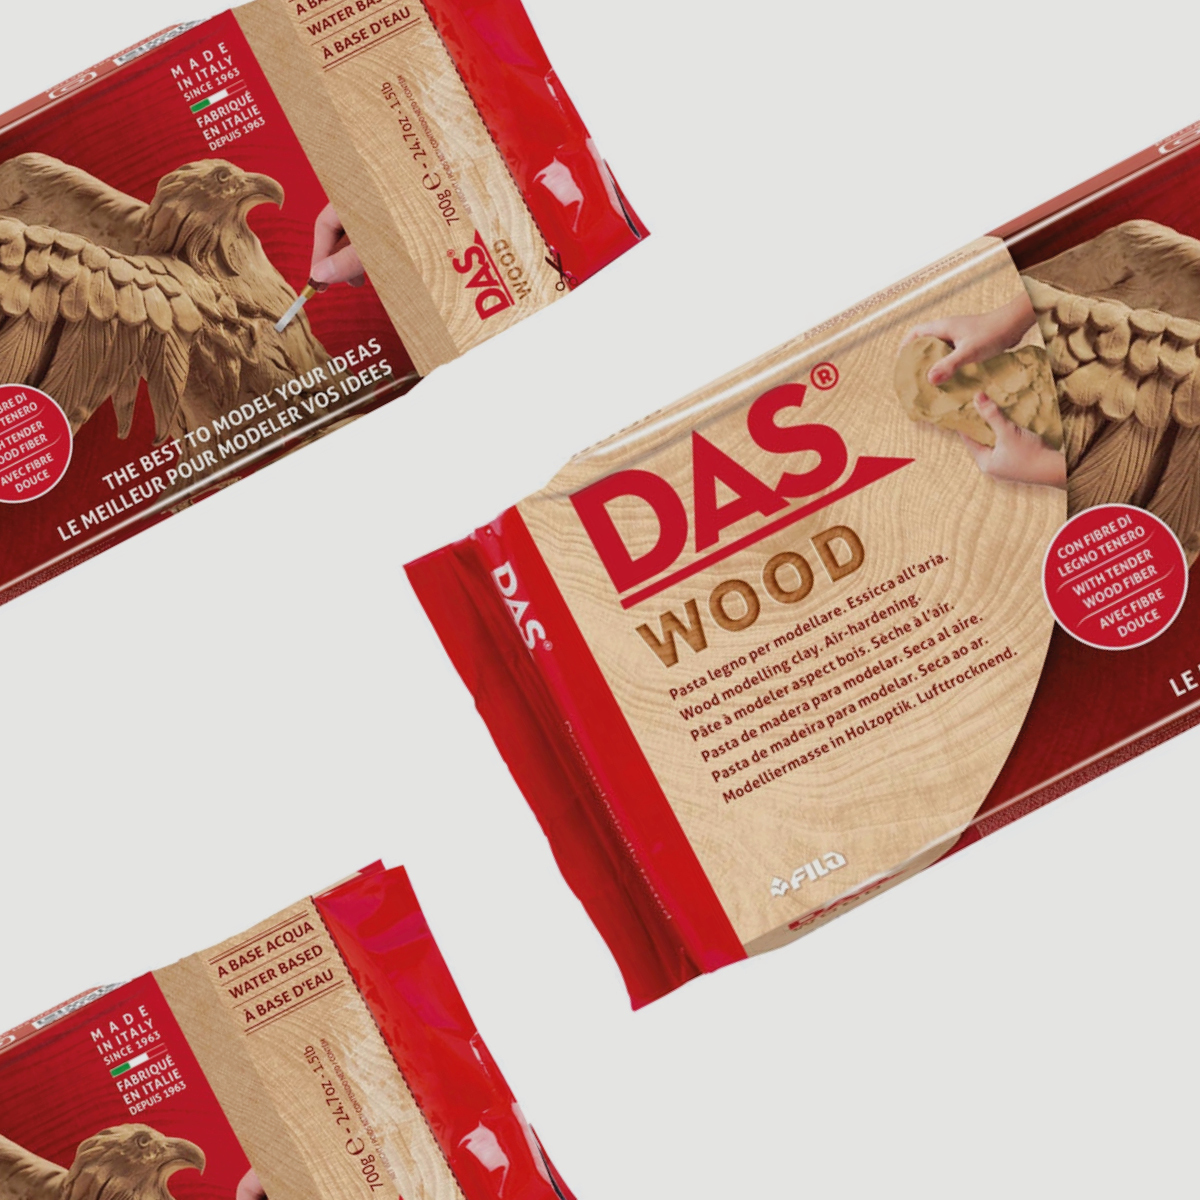 Das Wood .75 Lb Air Hardening Modeling Clay - The Art Store/Commercial Art  Supply